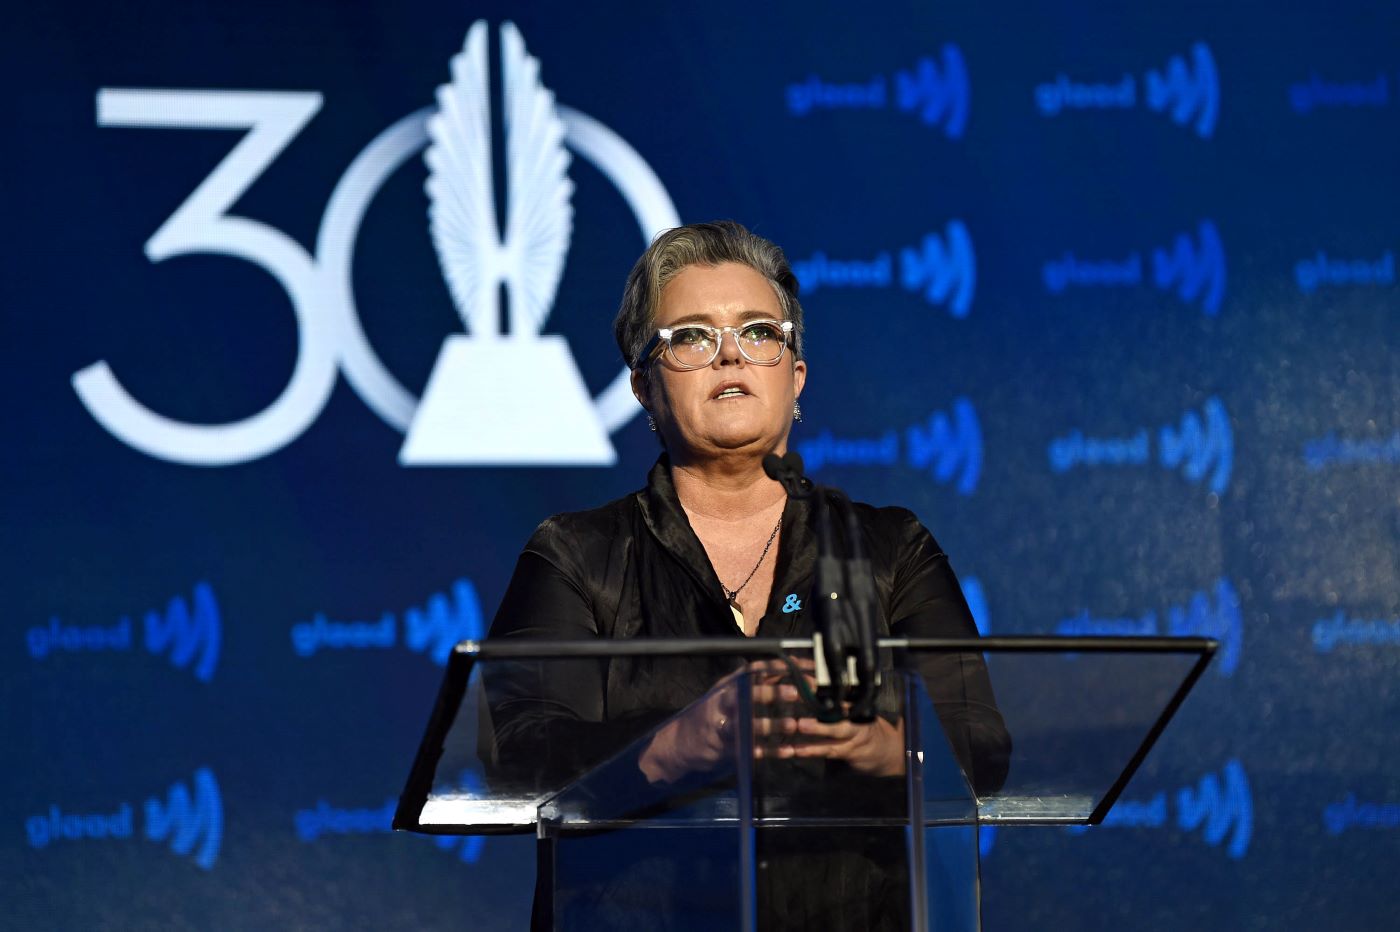 Rosie O'Donnell wearing all black in front of a blue and white background.